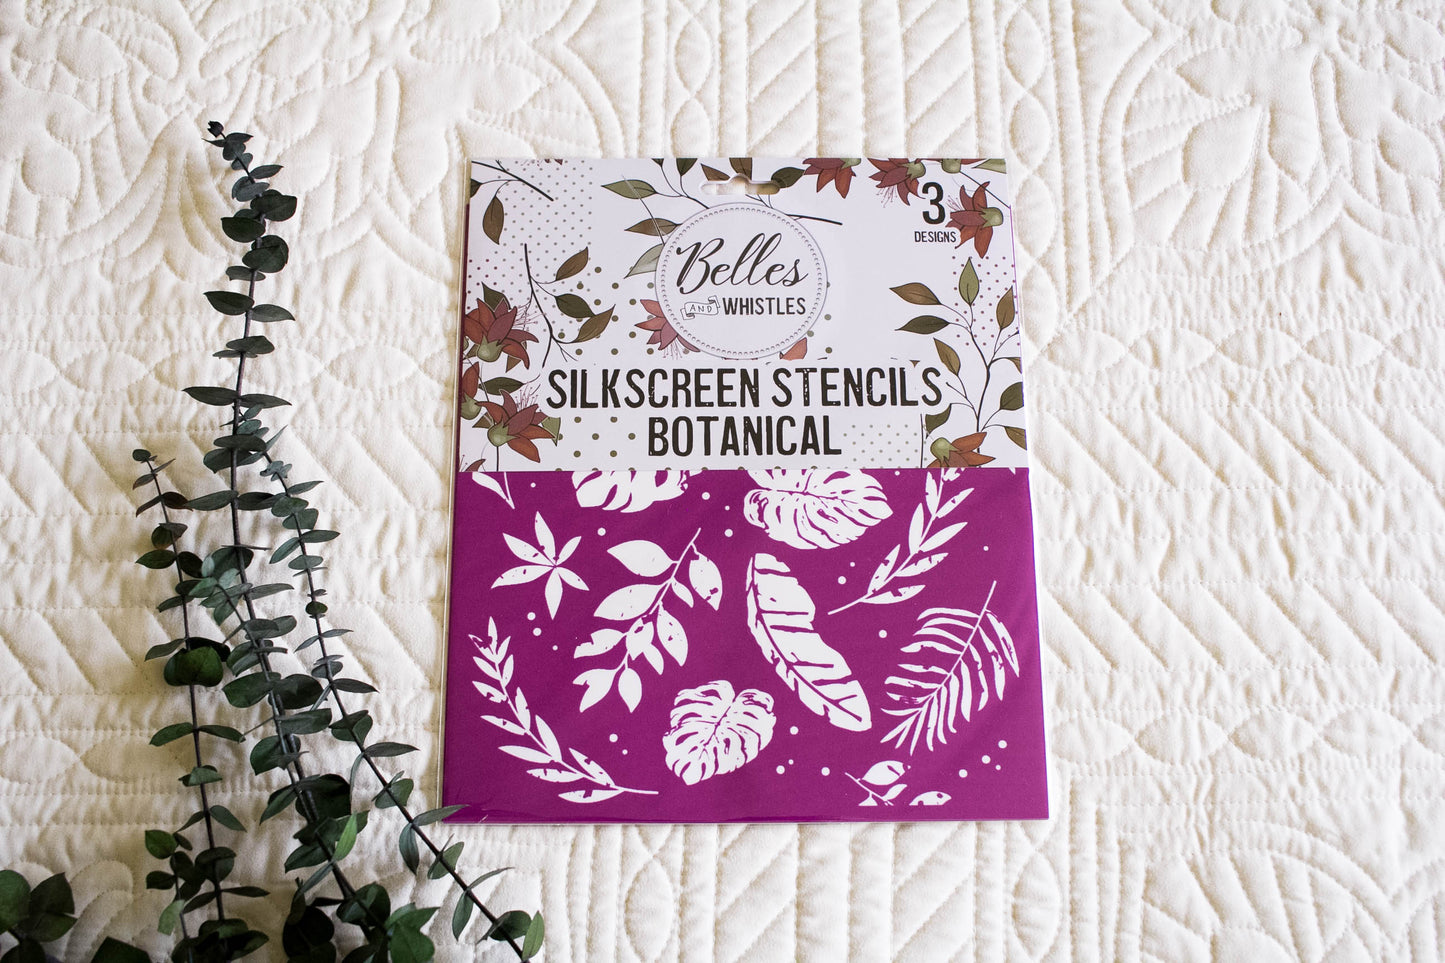 Belles and Whistles Silk Screen Stencils - Botanical